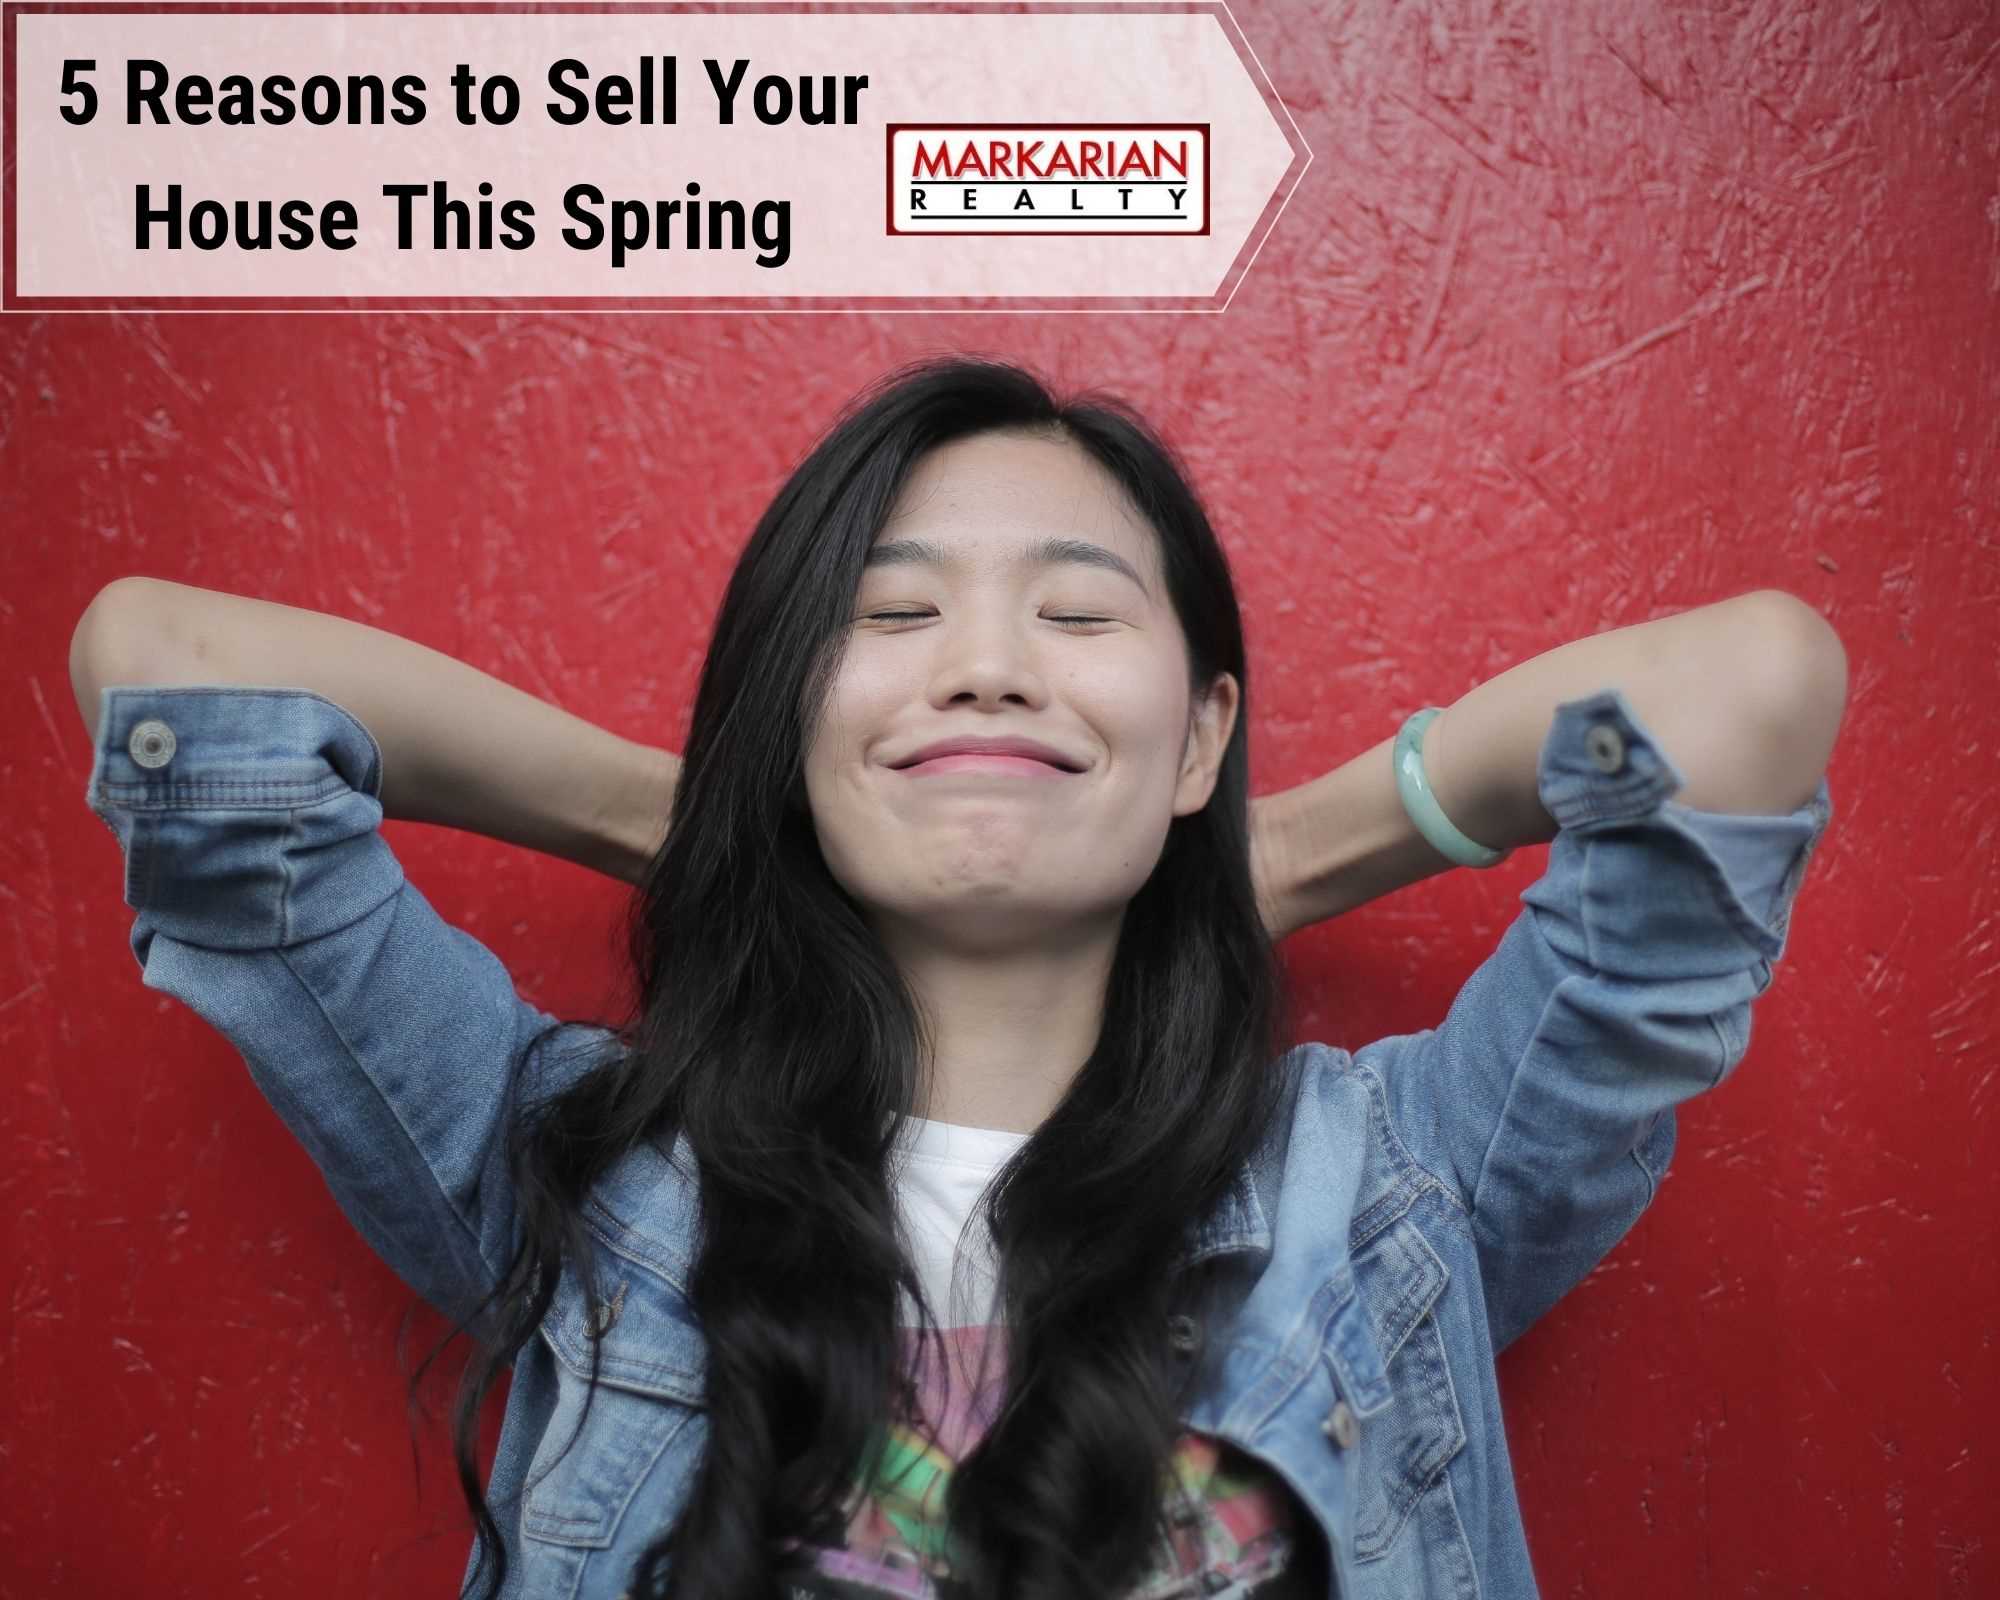 5 Reasons to Sell Your House This Spring